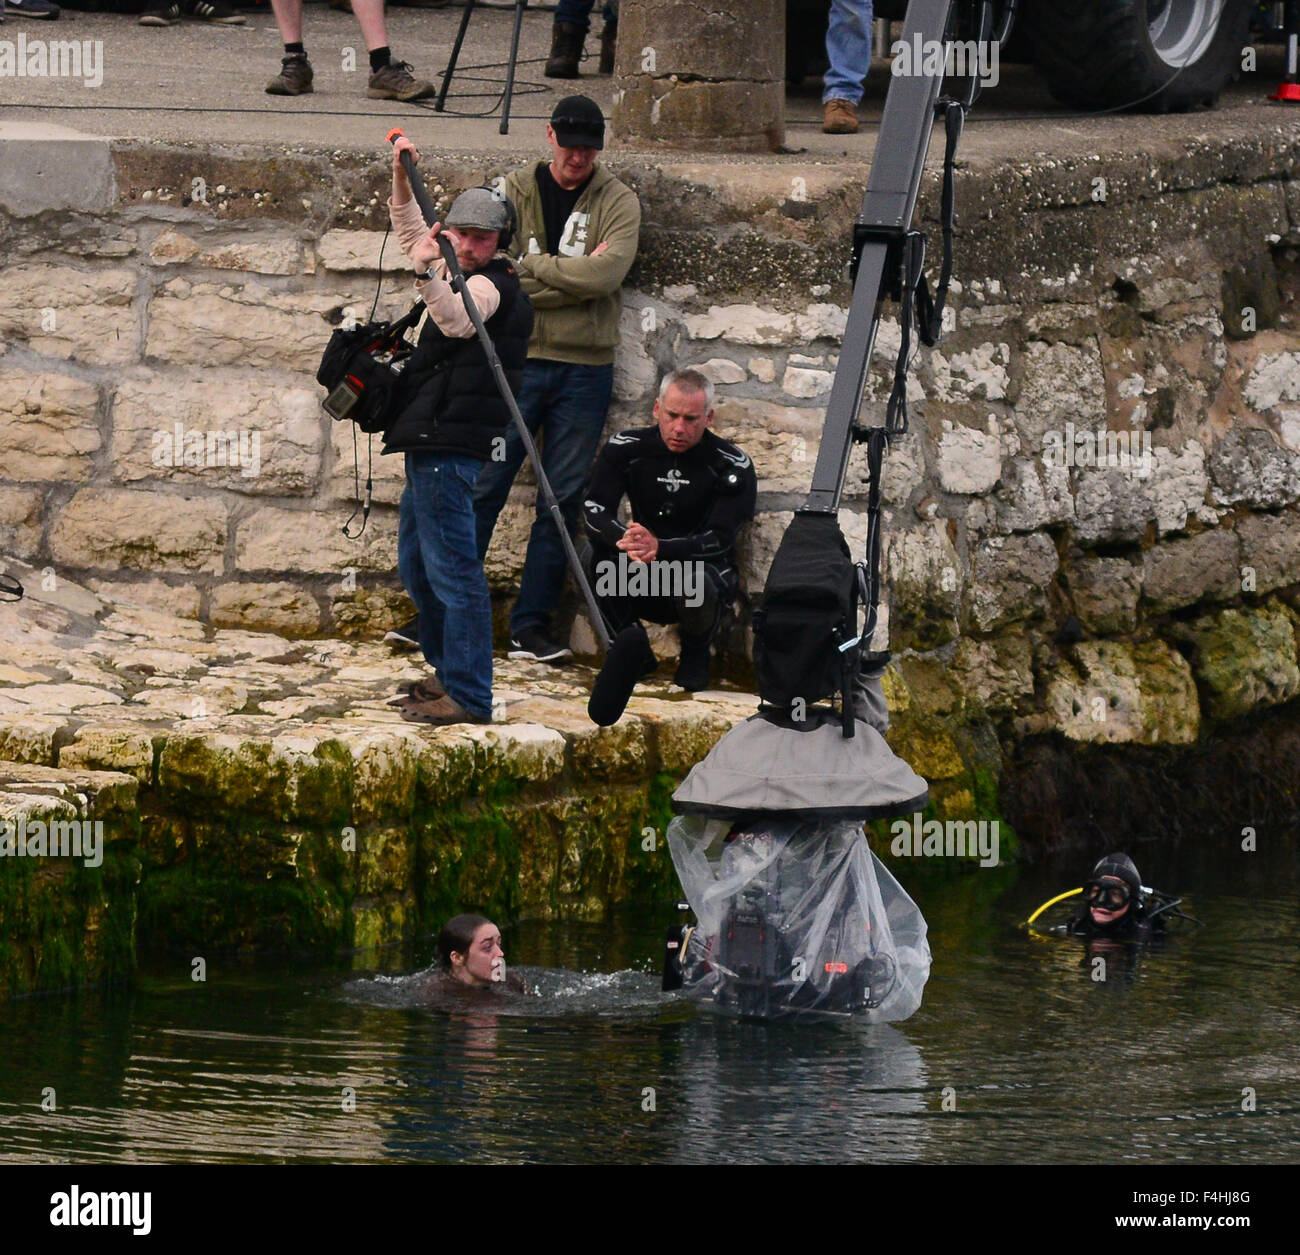 18 year old 'Game of Thrones' star Maisie Williams suffers for her art as she takes a plunge into the chilly waters of the Irish Sea in character as young Arya Stark while filming continues for season 6 of the hit US TV show in Carnlough Harbour, Northern Stock Photo